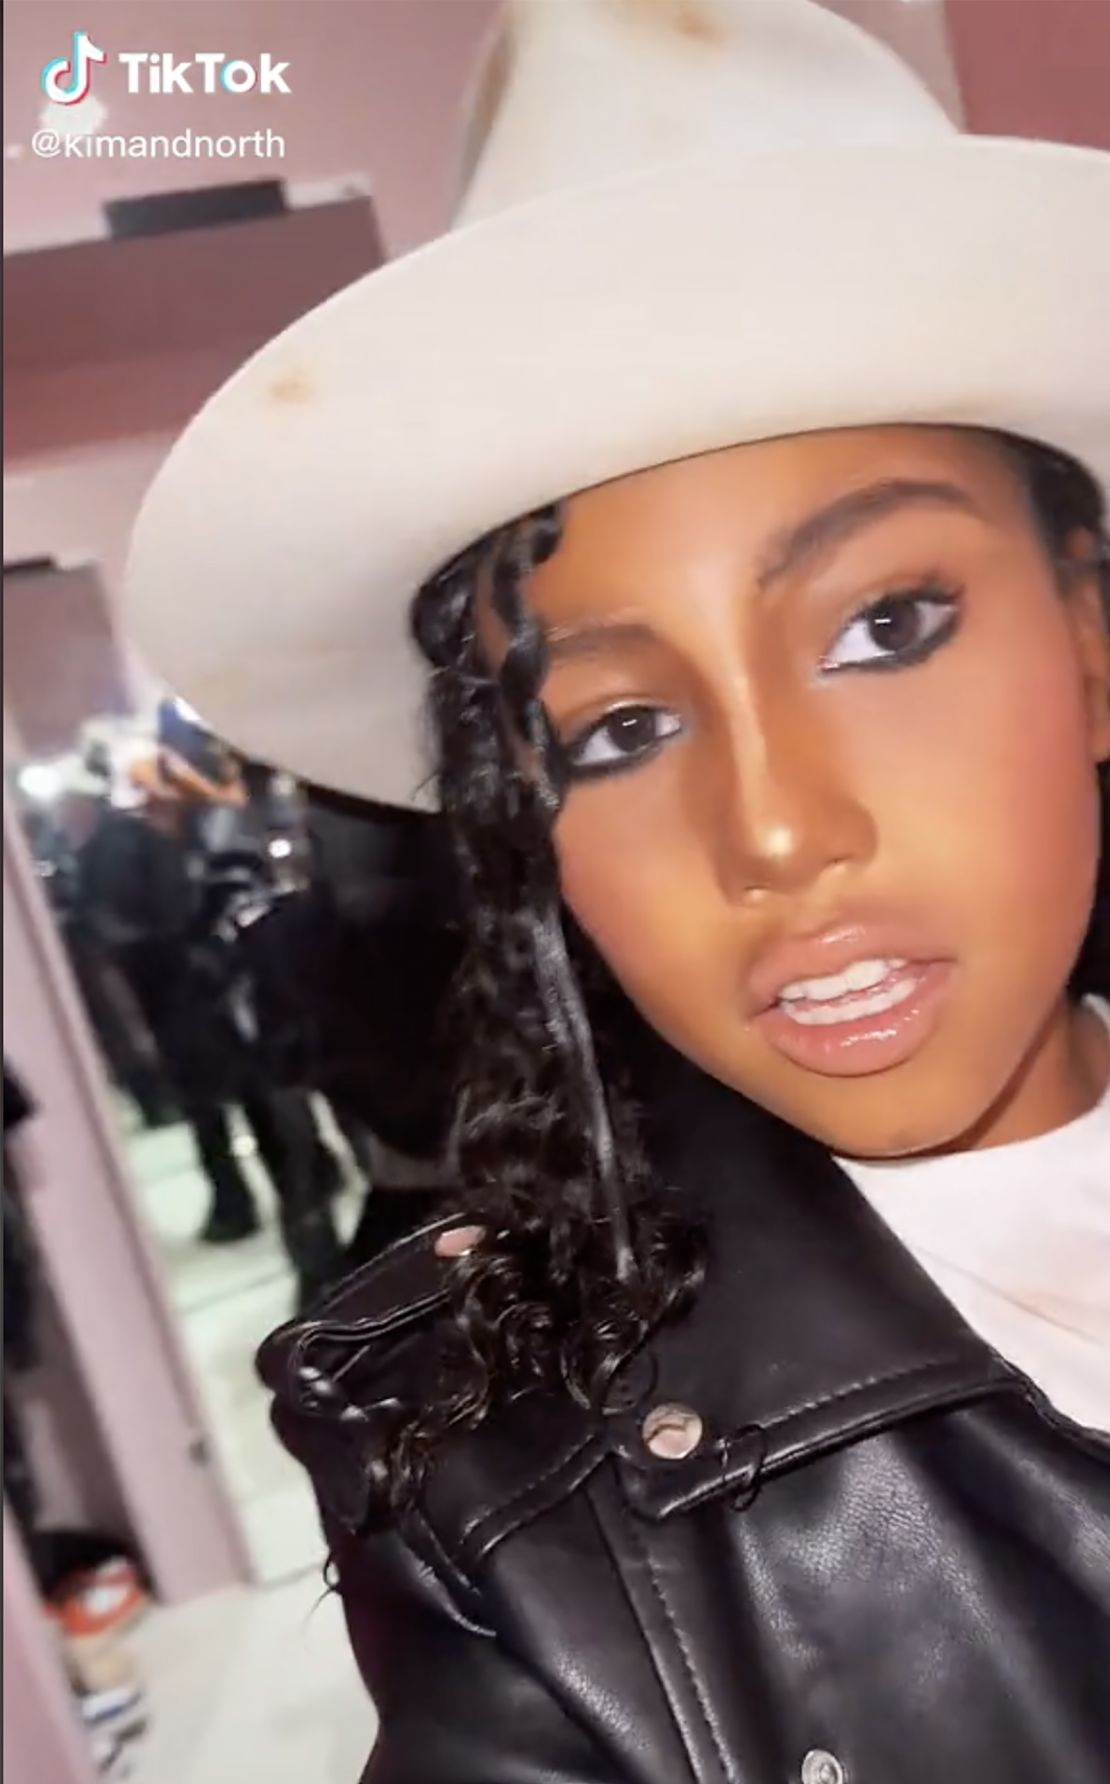 North West posted a video of her wearing Michael Jackson's fedora on the verified account she shares with her mother.